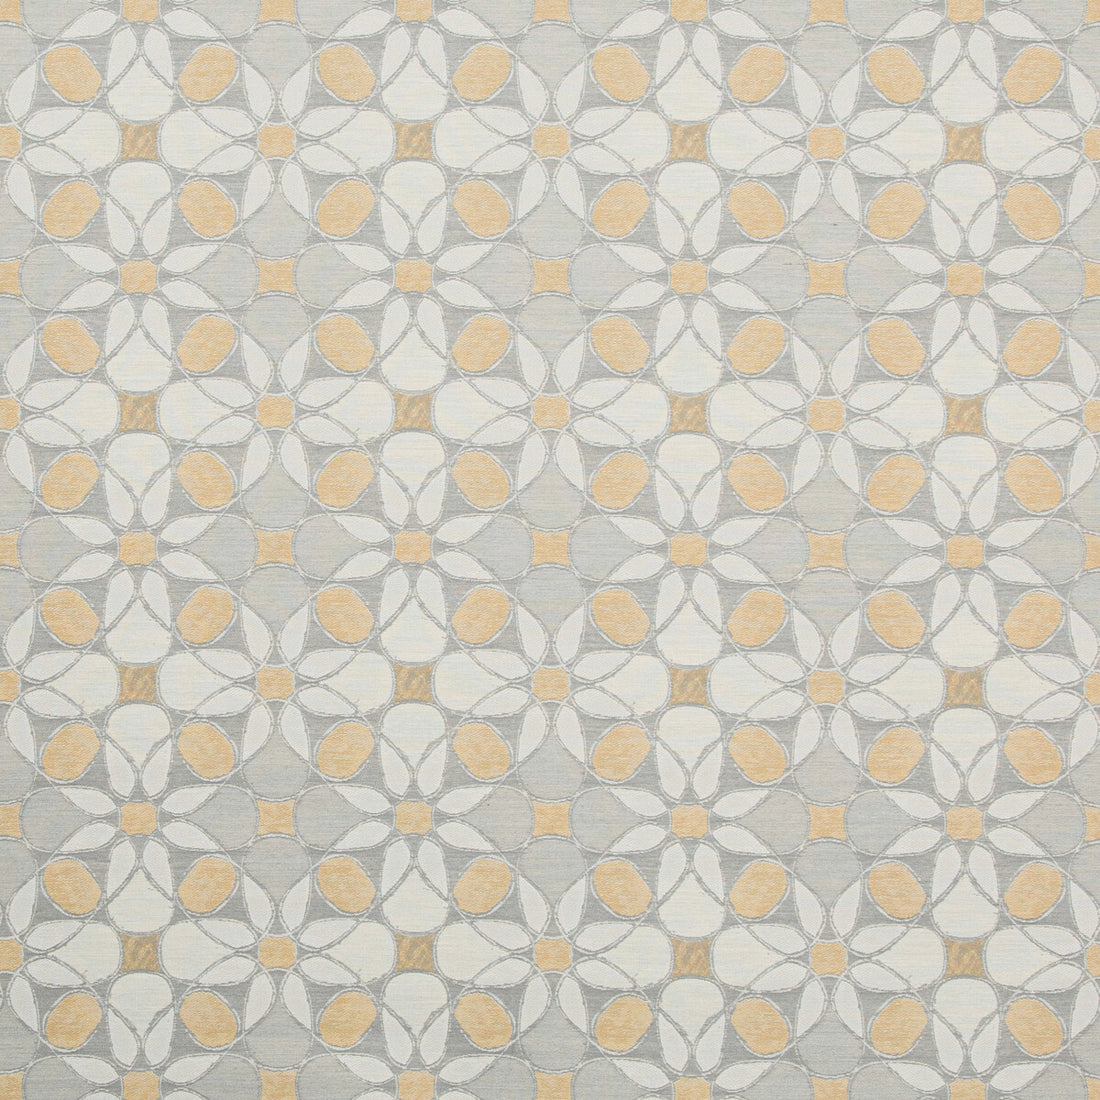 Tiepolo fabric in sandstone color - pattern 35882.11.0 - by Kravet Contract in the Gis Crypton Green collection